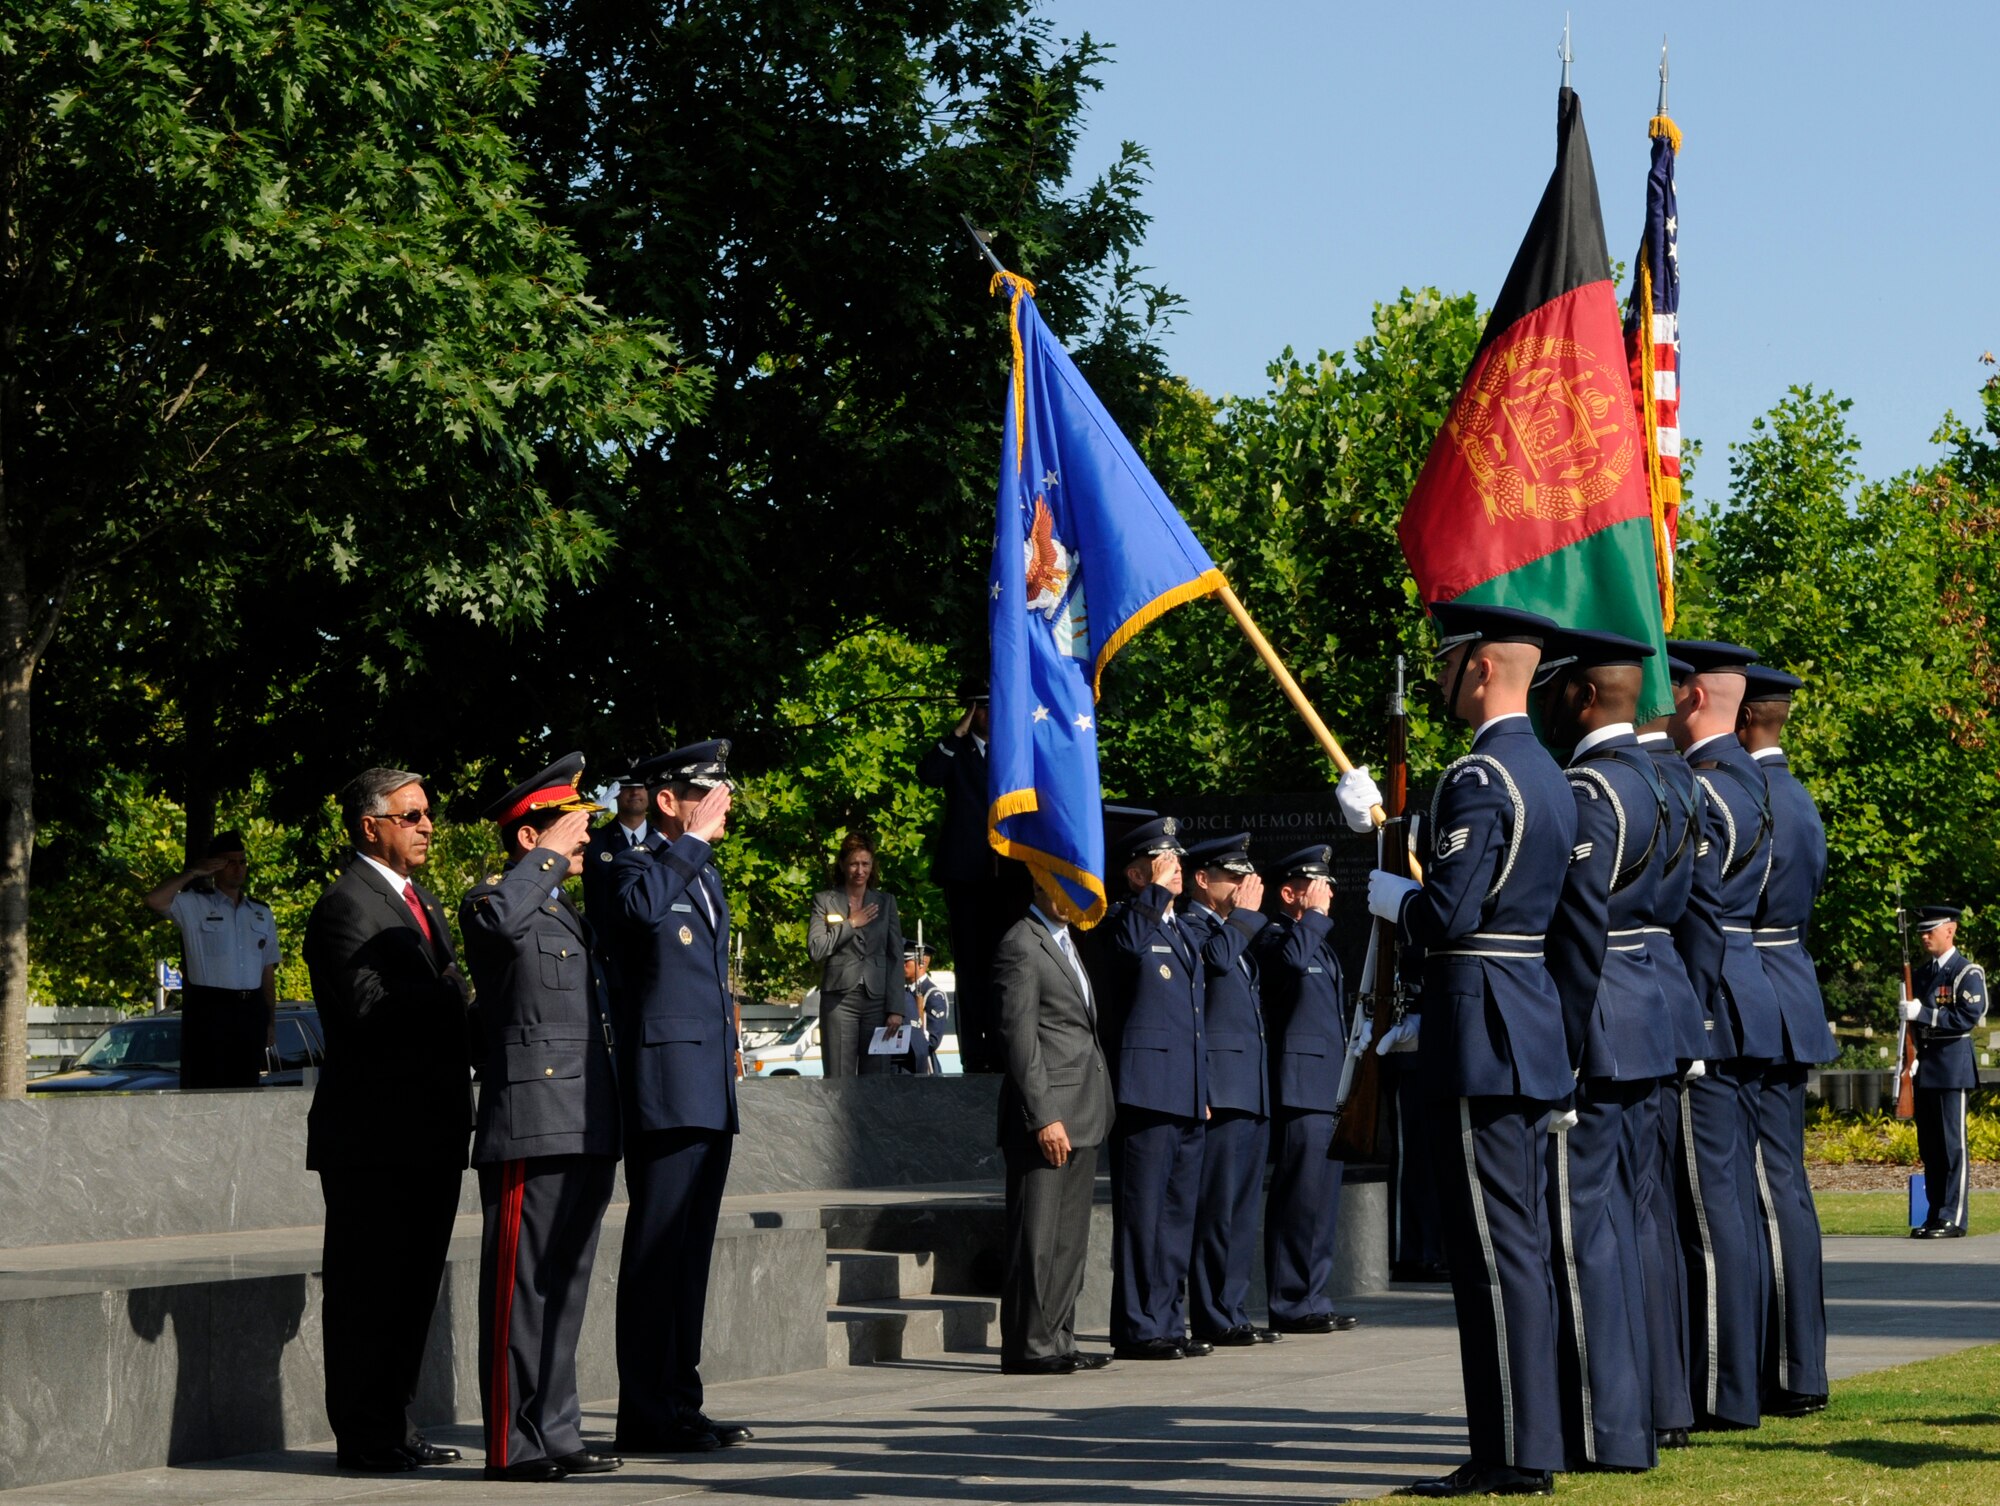 Gen. Norton Schwartz, Air Force chief of staff, and Maj. Gen. Mohammad Dawran, commander Afghan National Army Air Corps, salute during the playing of the United States and Afghanistan national anthems played by the United States Air Force Band during an arrival ceremony held in General Dawrans honor July 14 at the Air Force Memorial in Arlington, Va. The arrival ceremony welcomed General Dawran to the United States and started his nationwide tour of Air Force installations. (U.S. Air Force photo by Staff Sgt. Dan DeCook)